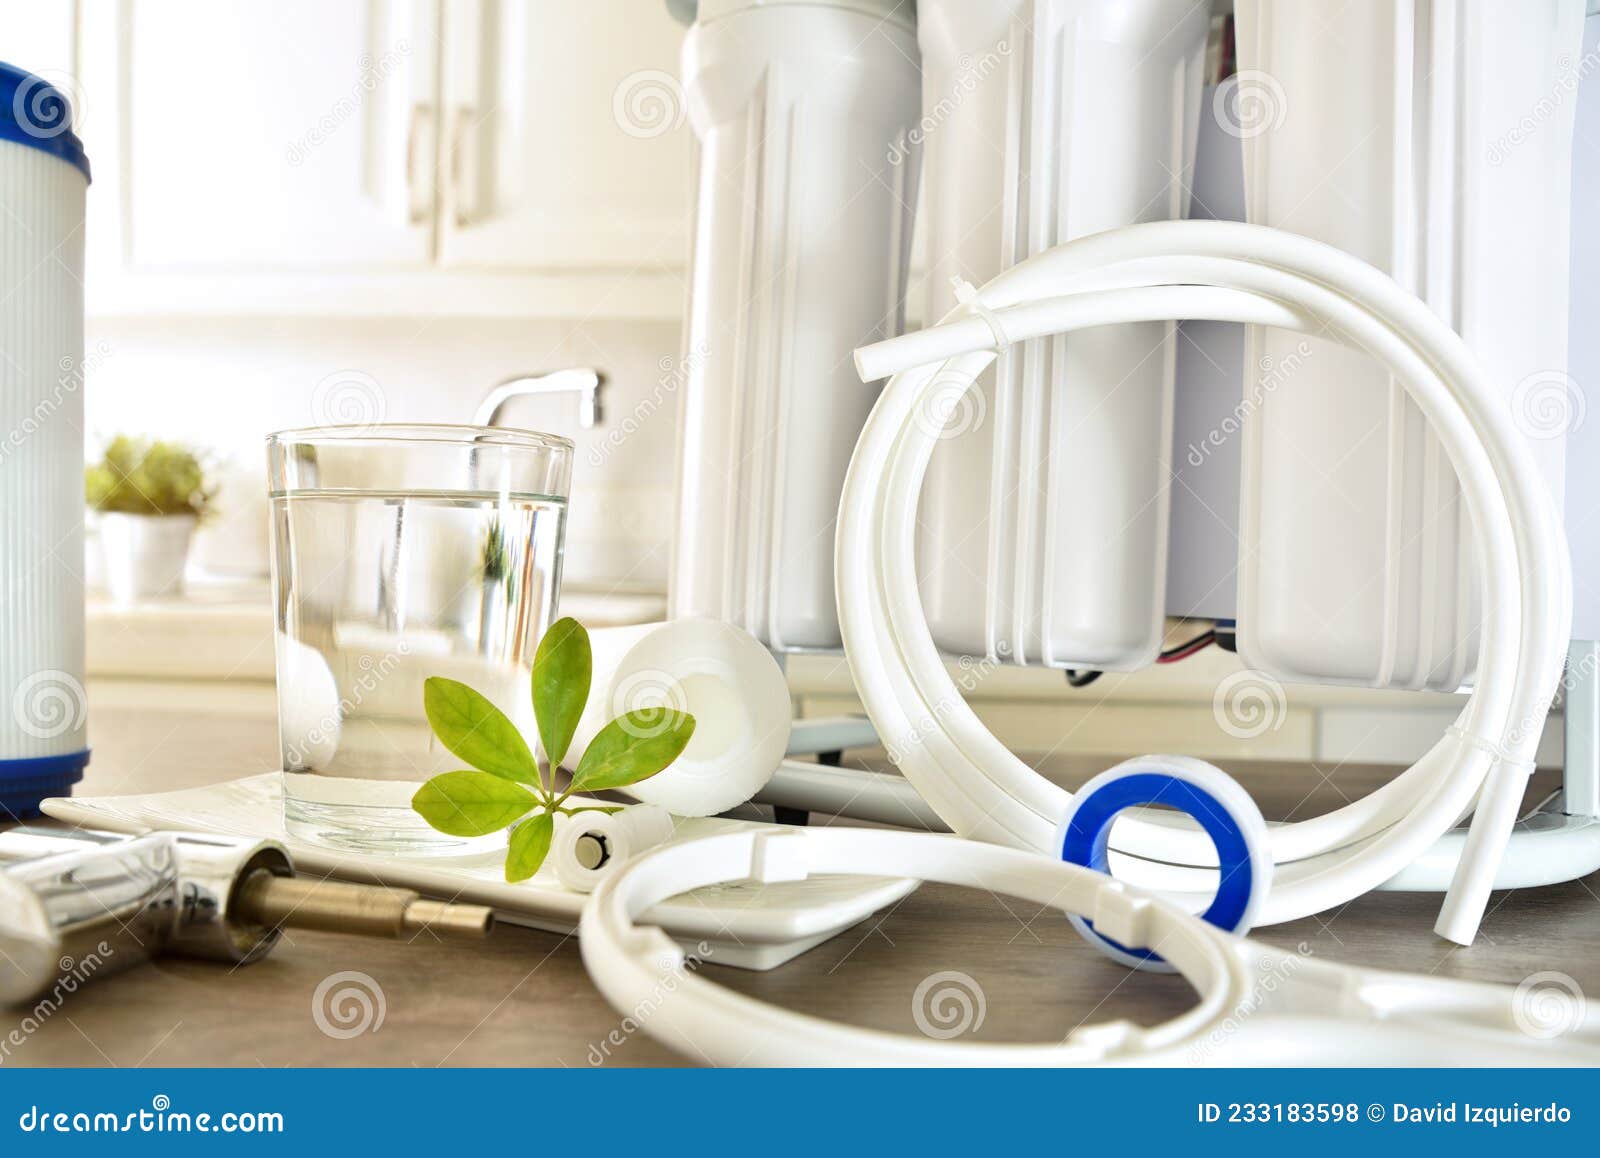 equipment for mounting domestic reverse osmosis equipment on kitchen